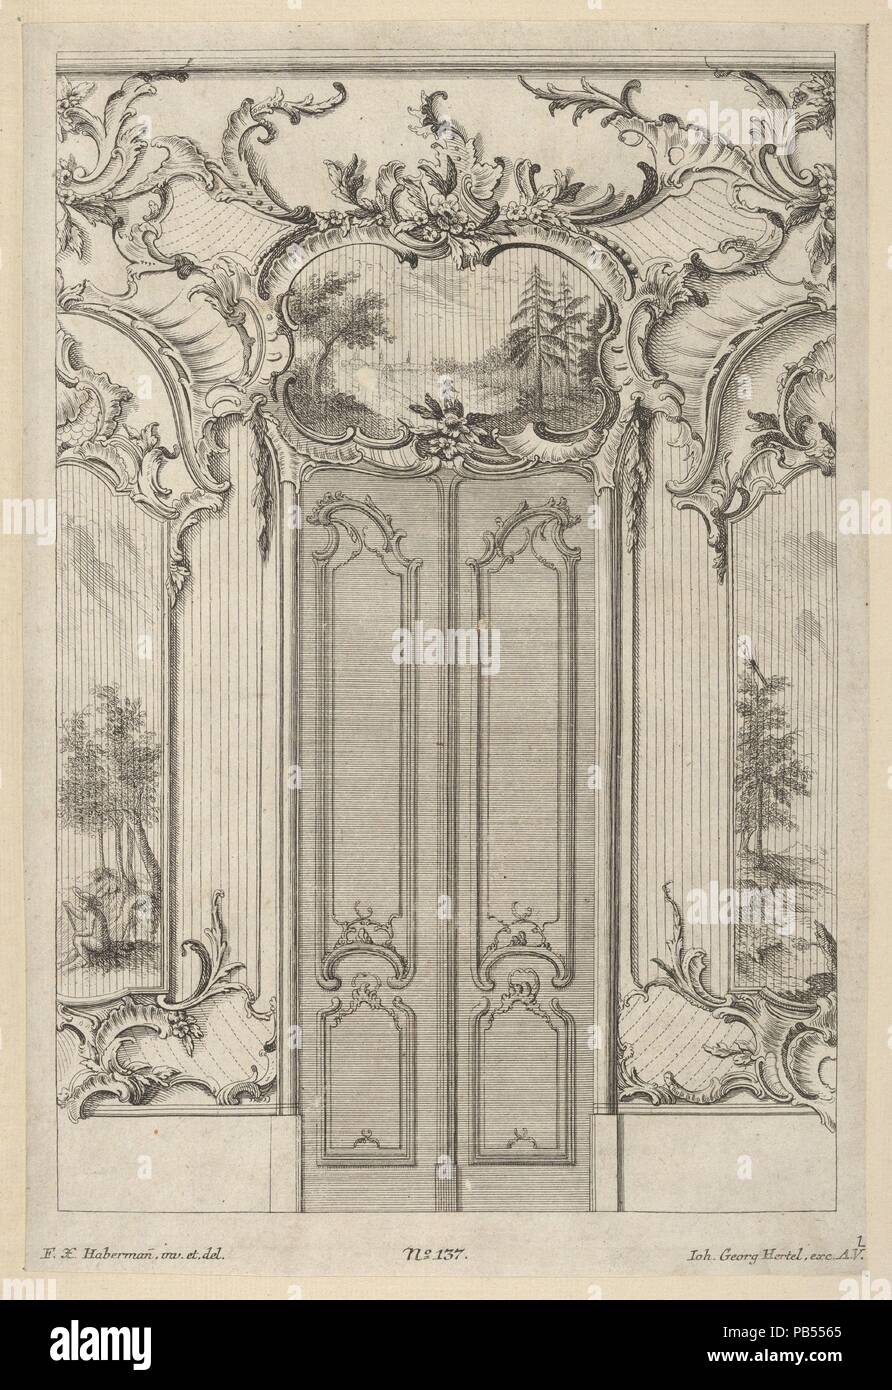 Wall Elevation with a Double Door, from 'Wandfüllungen'. Artist: Franz Xavier Habermann (German, 1721-1796). Dimensions: Sheet: 13 1/2 × 8 1/8 in. (34.3 × 20.6 cm). Publisher: Johann Georg Hertel (German, Augsburg ca. 1700-1775 Augsburg). Date: ca. 1748-70.  Wall elevation in Rococo style with a double door in the center. Over the door there is an overdoor painting showing a landscape. The walls on either side of the door are decorated with rocaille ornaments which were presumably to be executed in (gilt) stucco. Museum: Metropolitan Museum of Art, New York, USA. Stock Photo